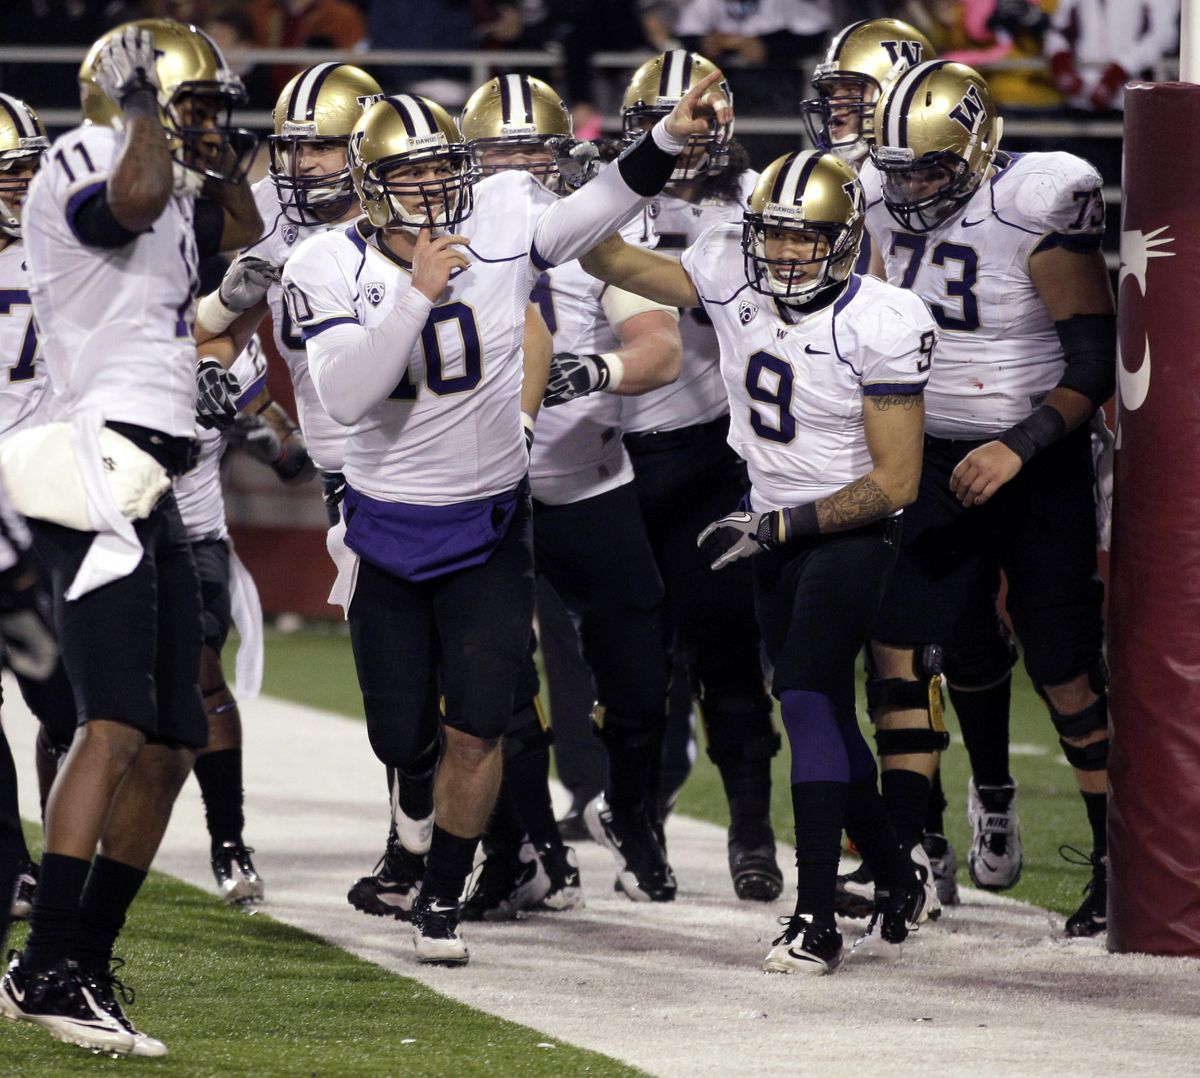 Washington quarterback Jake Locker (10) celebrates with his team after he ran for a touchdown against Washington State in the first half of the Apple Cup.  (Ted Warren / Associated Press)